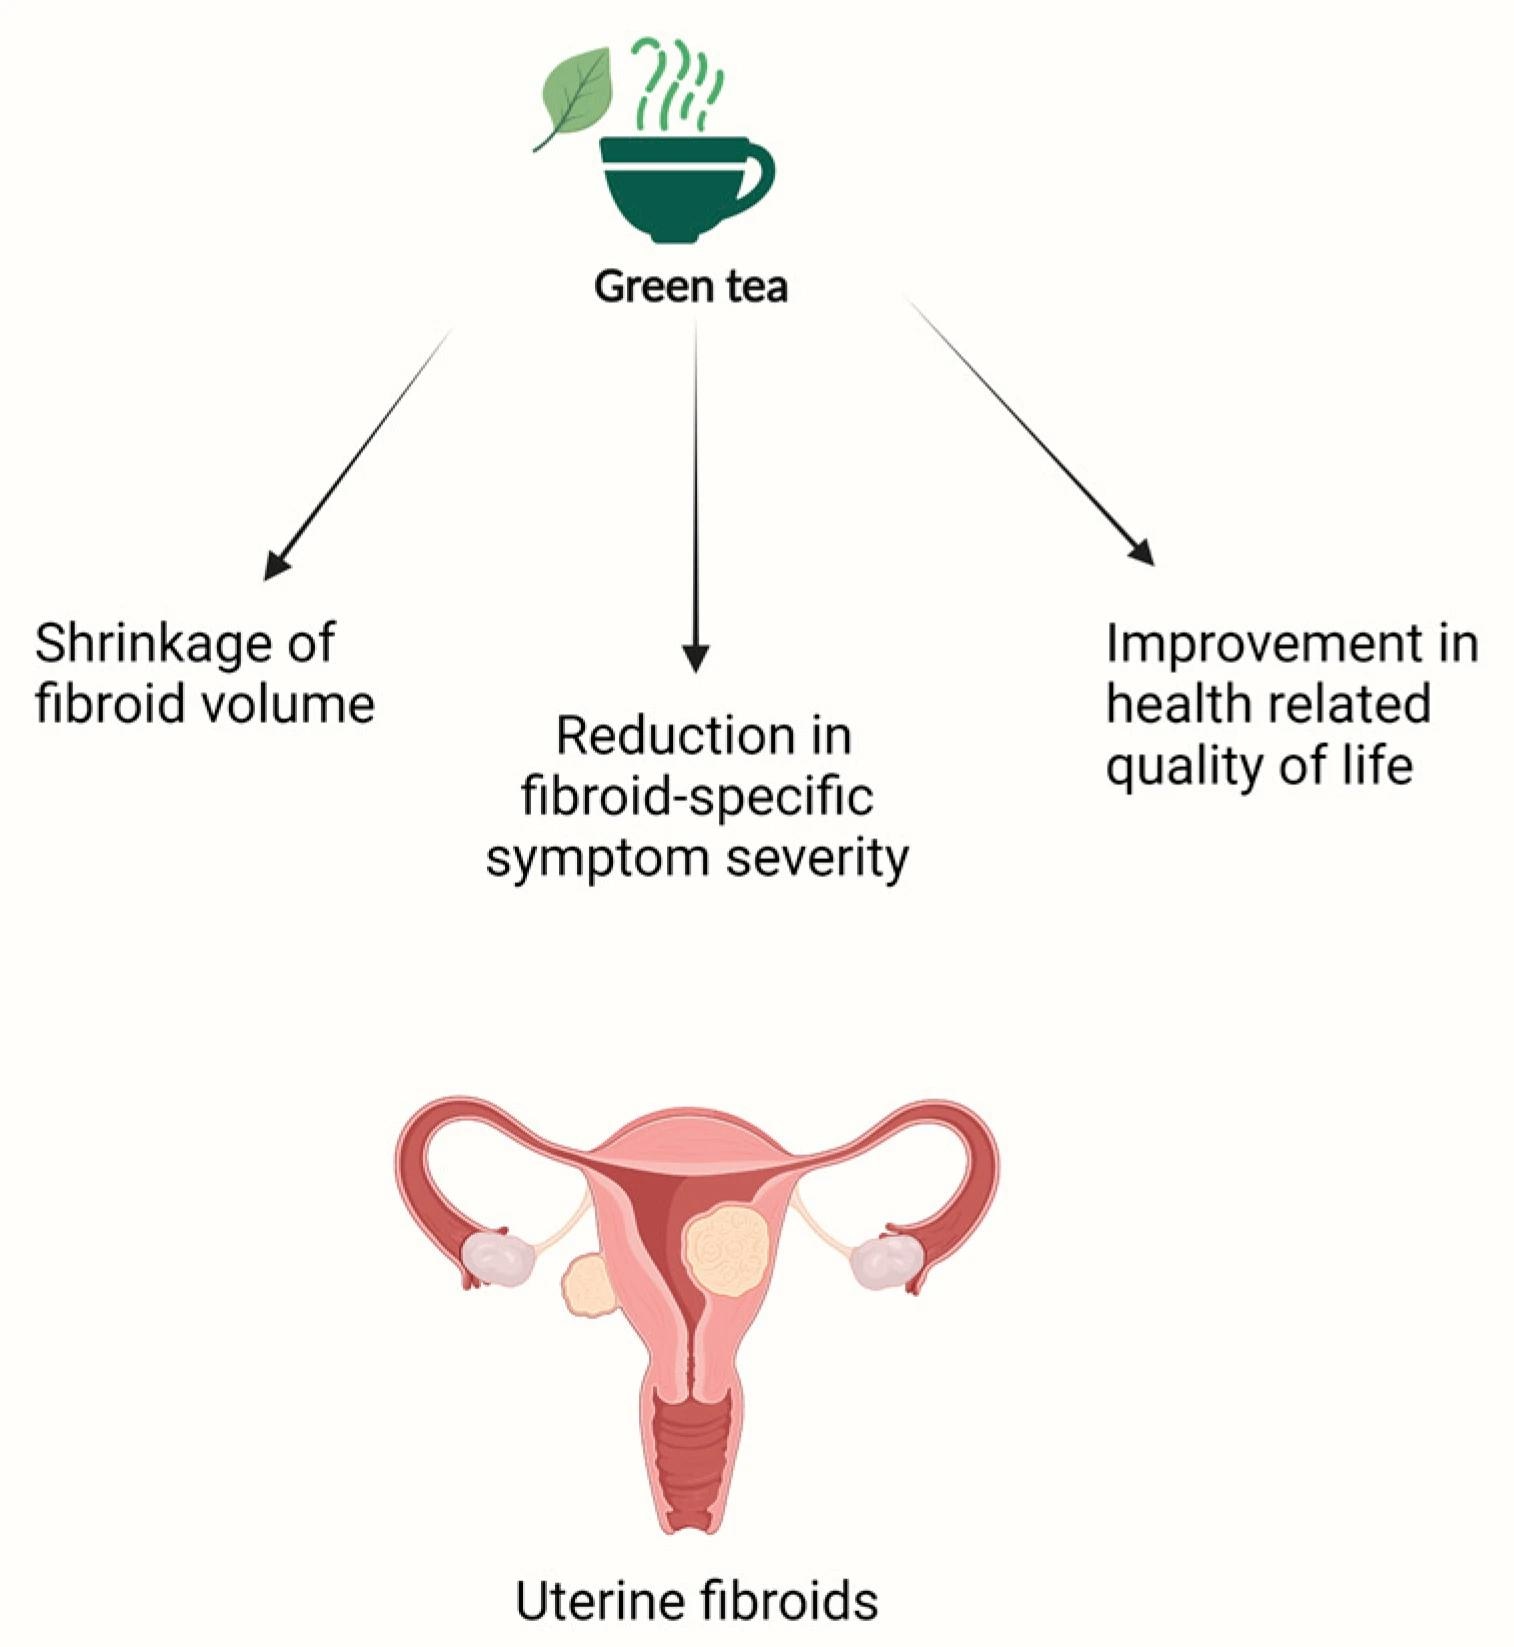 Schematic presentation of the effects of green tea on uterine fibroids.